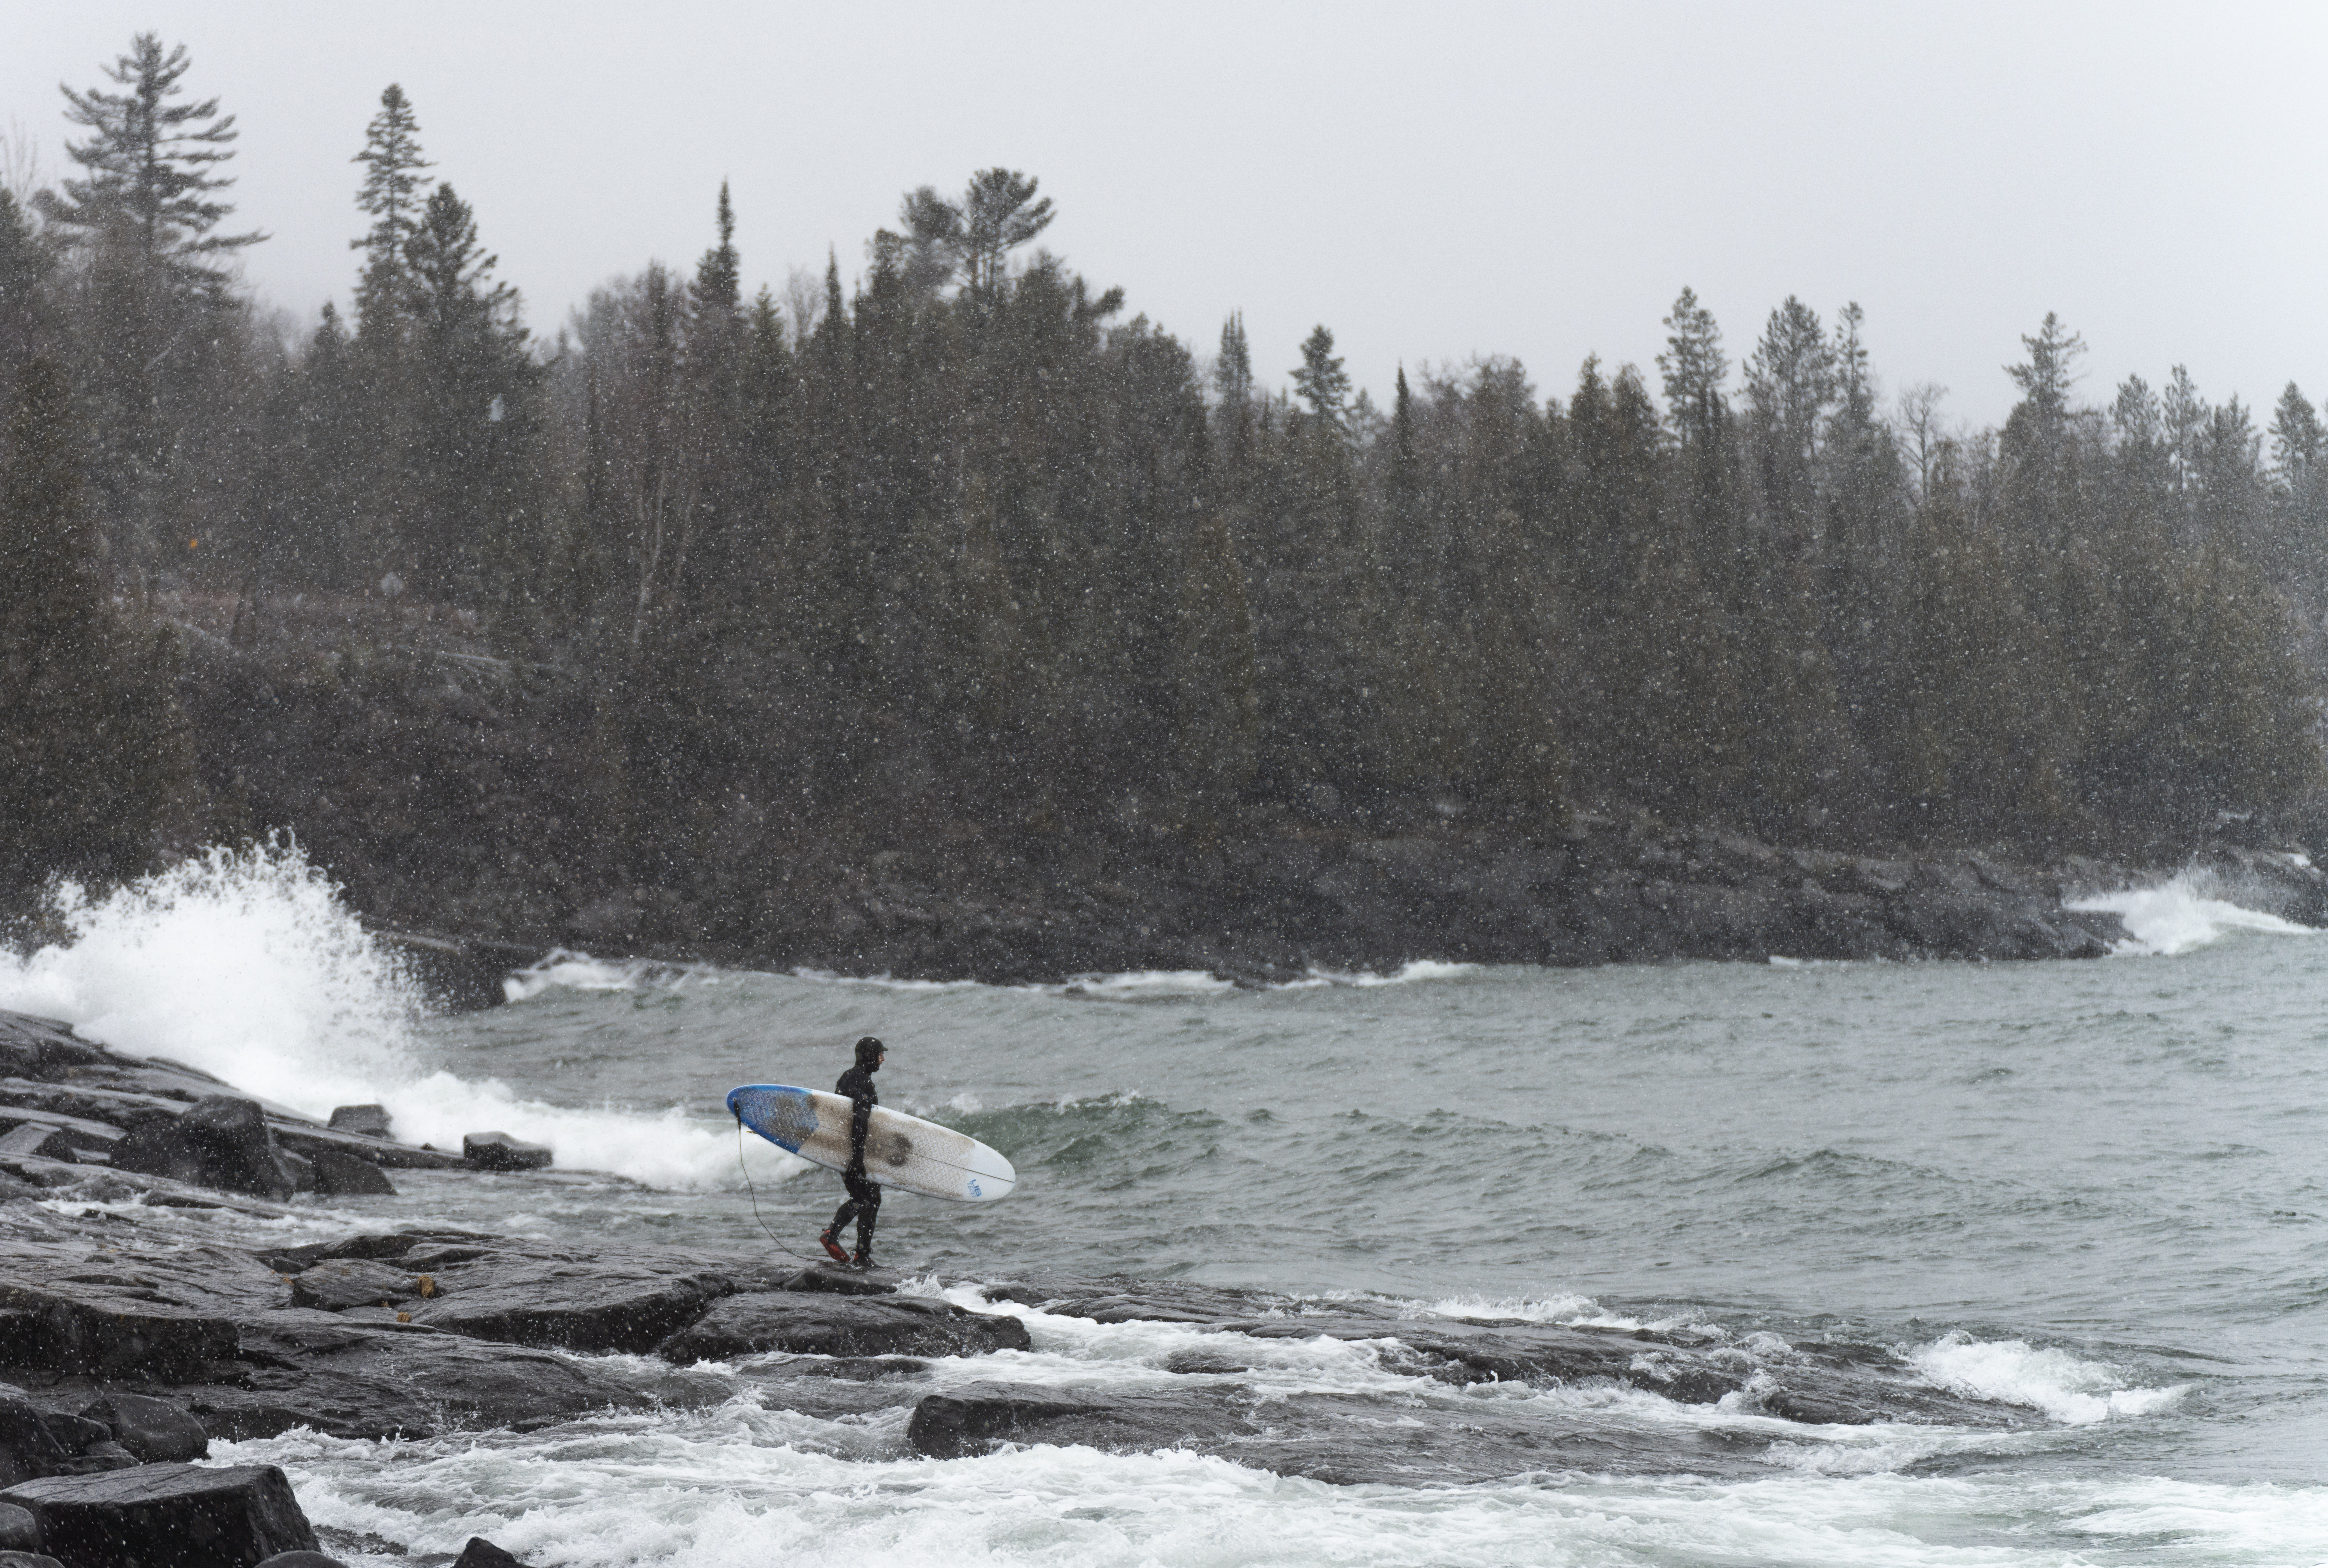 Lone surfer holding a white and blue board, standing on a rocky shoreline. There are evergreen trees in the background.